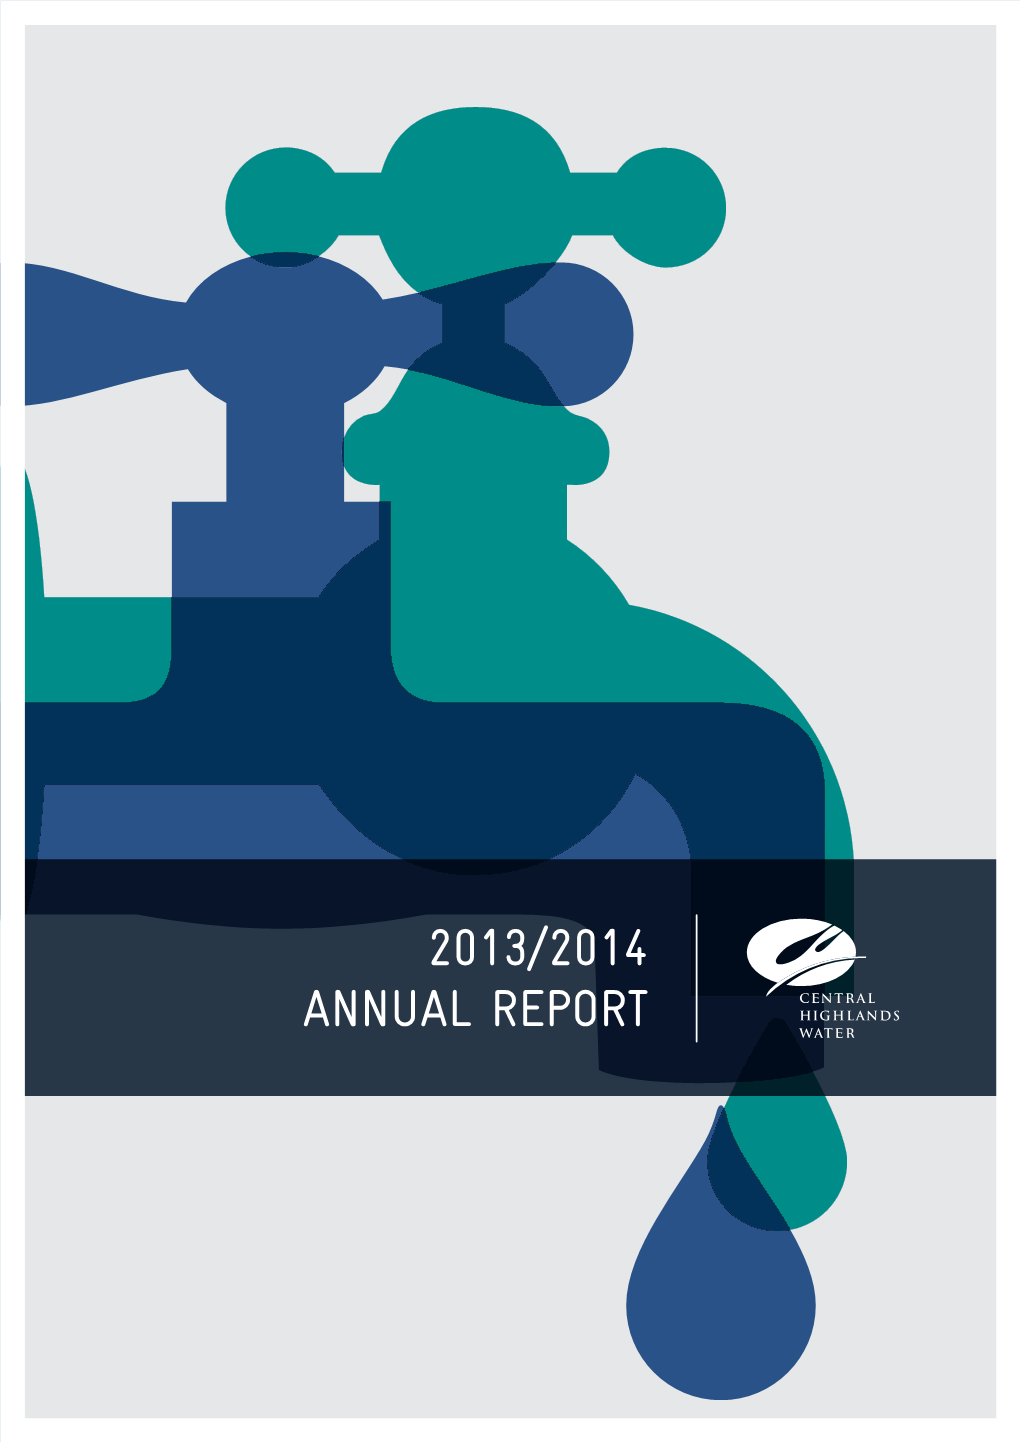 2013/2014 Annual Report Part 1 - Year in Review | Part 2 - Water Consumption & Drought Response | Part 3 - Environmental & Social Sustainability Service Area